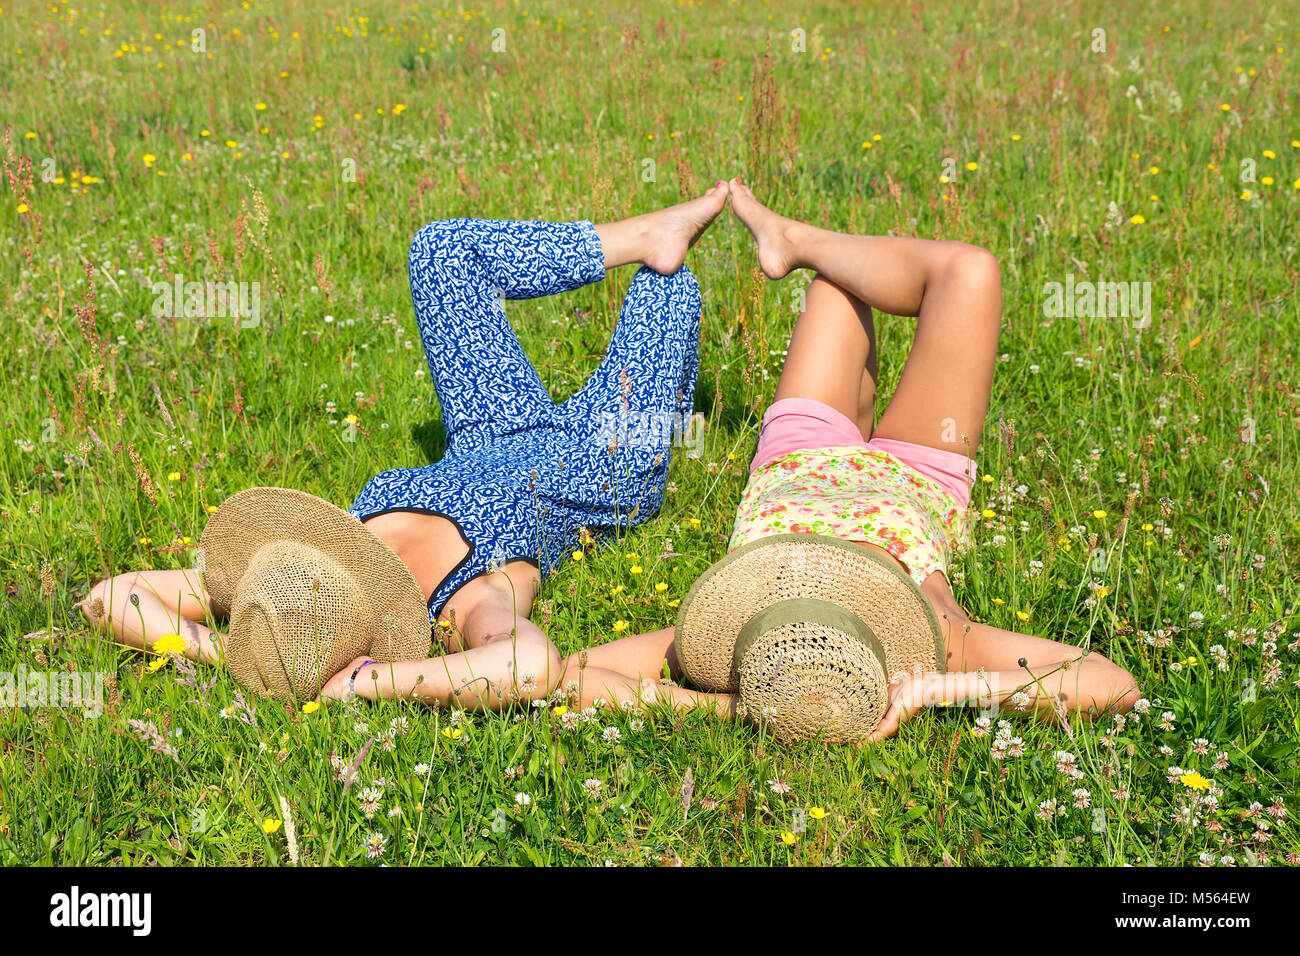 Deux amis lying together in meadow Banque D'Images